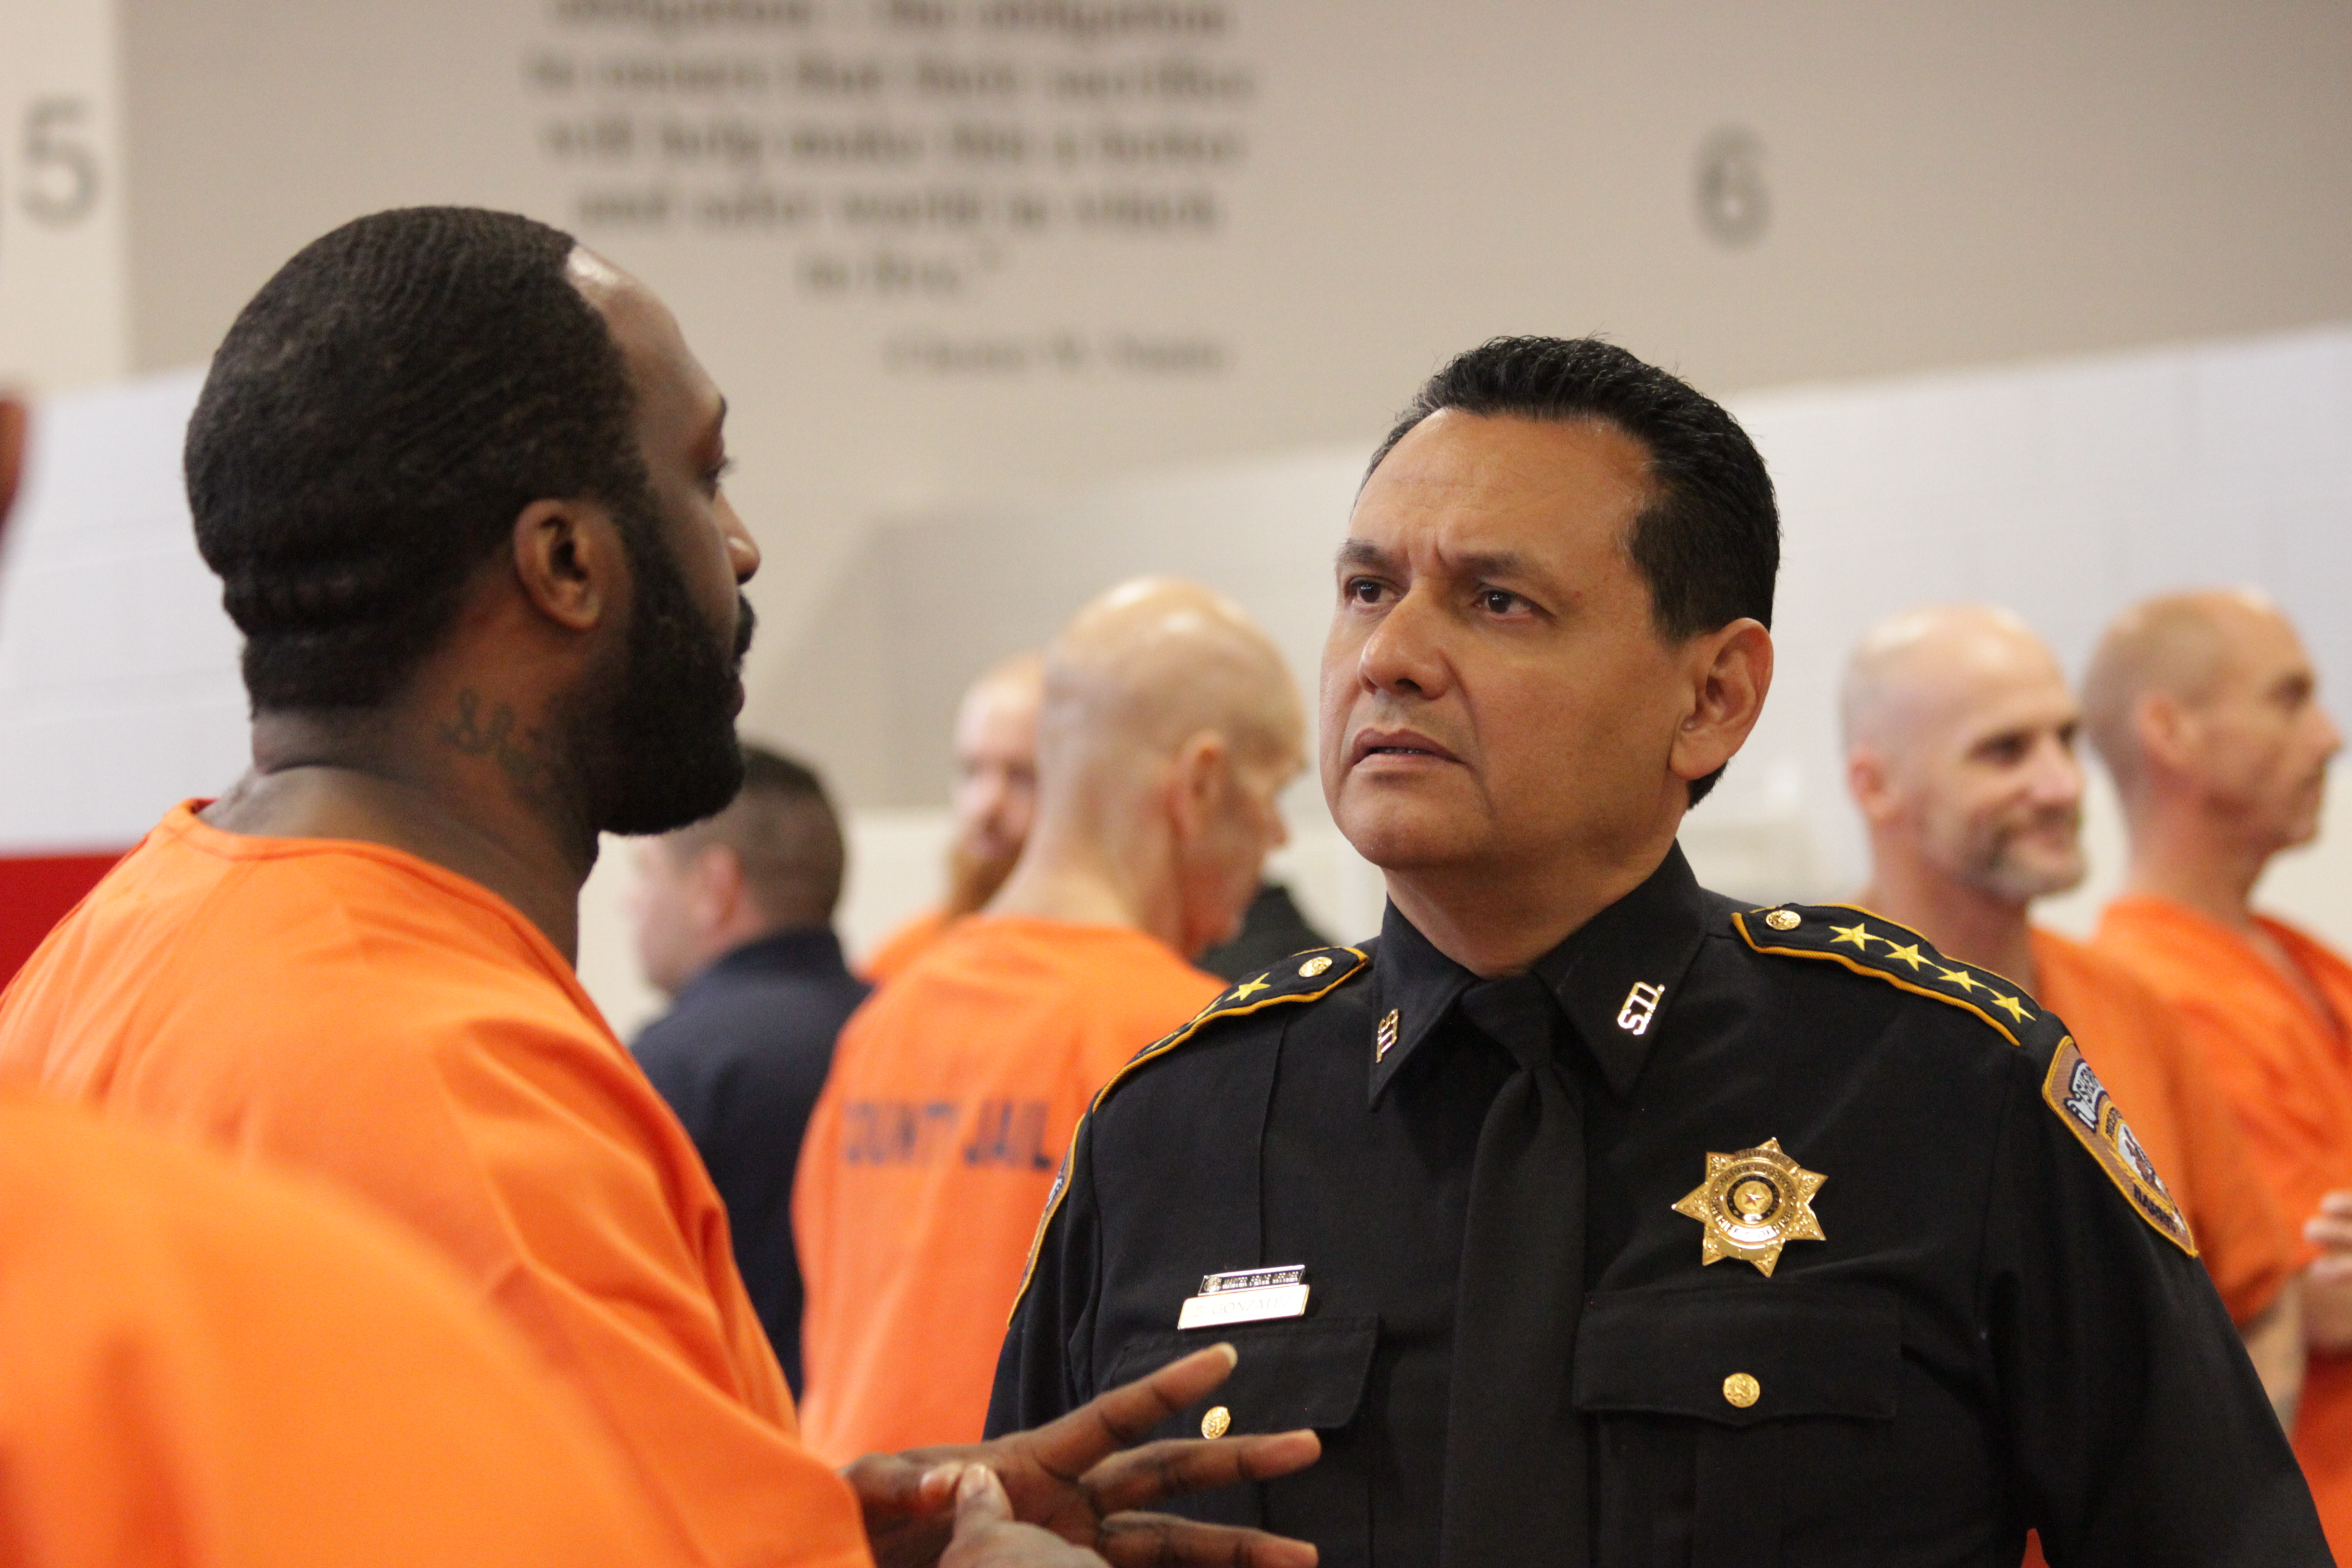 Sheriff Ed Gonzalez talks to an incarcerated person at the downtown Harris County jail in July.